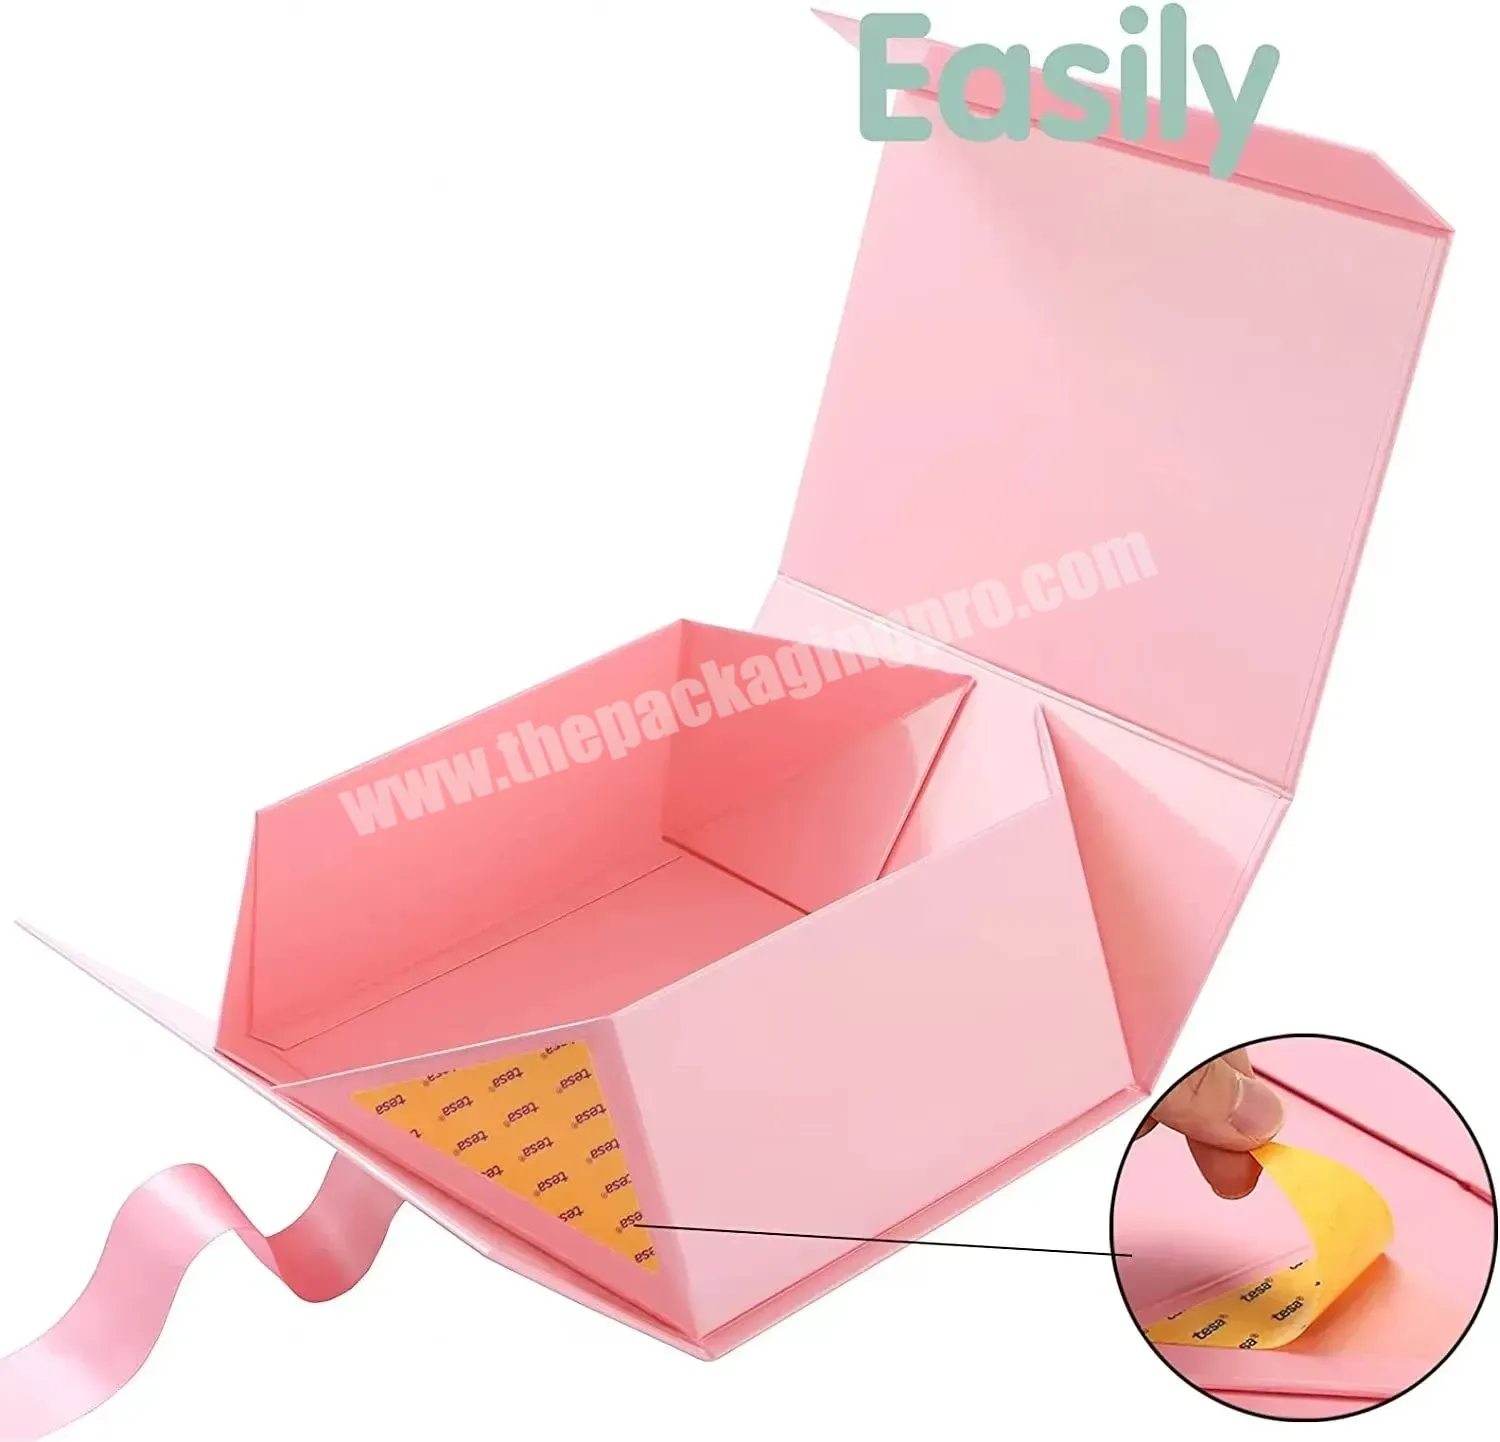 Cardboard Rigid Box Luxury Pink Gift Box Storage Folding Paper Gift Box Packaging - Buy Magnetic Gift Box,Large Rigid Paper Cardboard Gift Packaging Magnetic Folding Box,Custom Made White Box Gifts Packaging With Magnetic Lids.